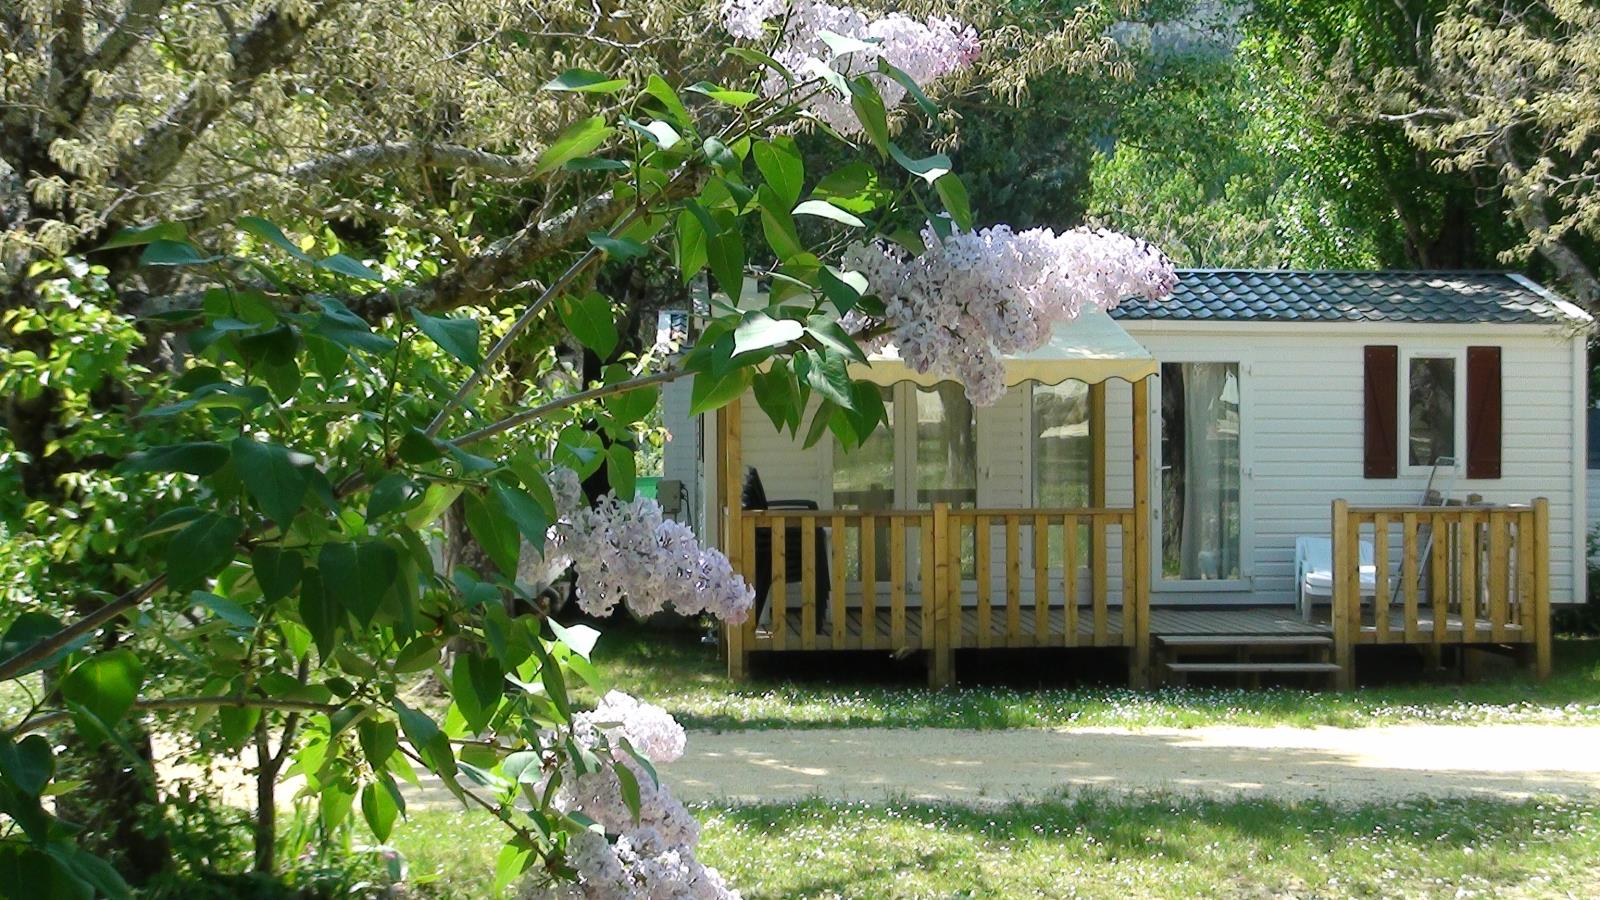 Accommodation - Mobilhome Luxe 2 Bedrooms With Airconditioning Arrival On Saturday (In High Season) Minimum 3 Nights - Camping des Gorges